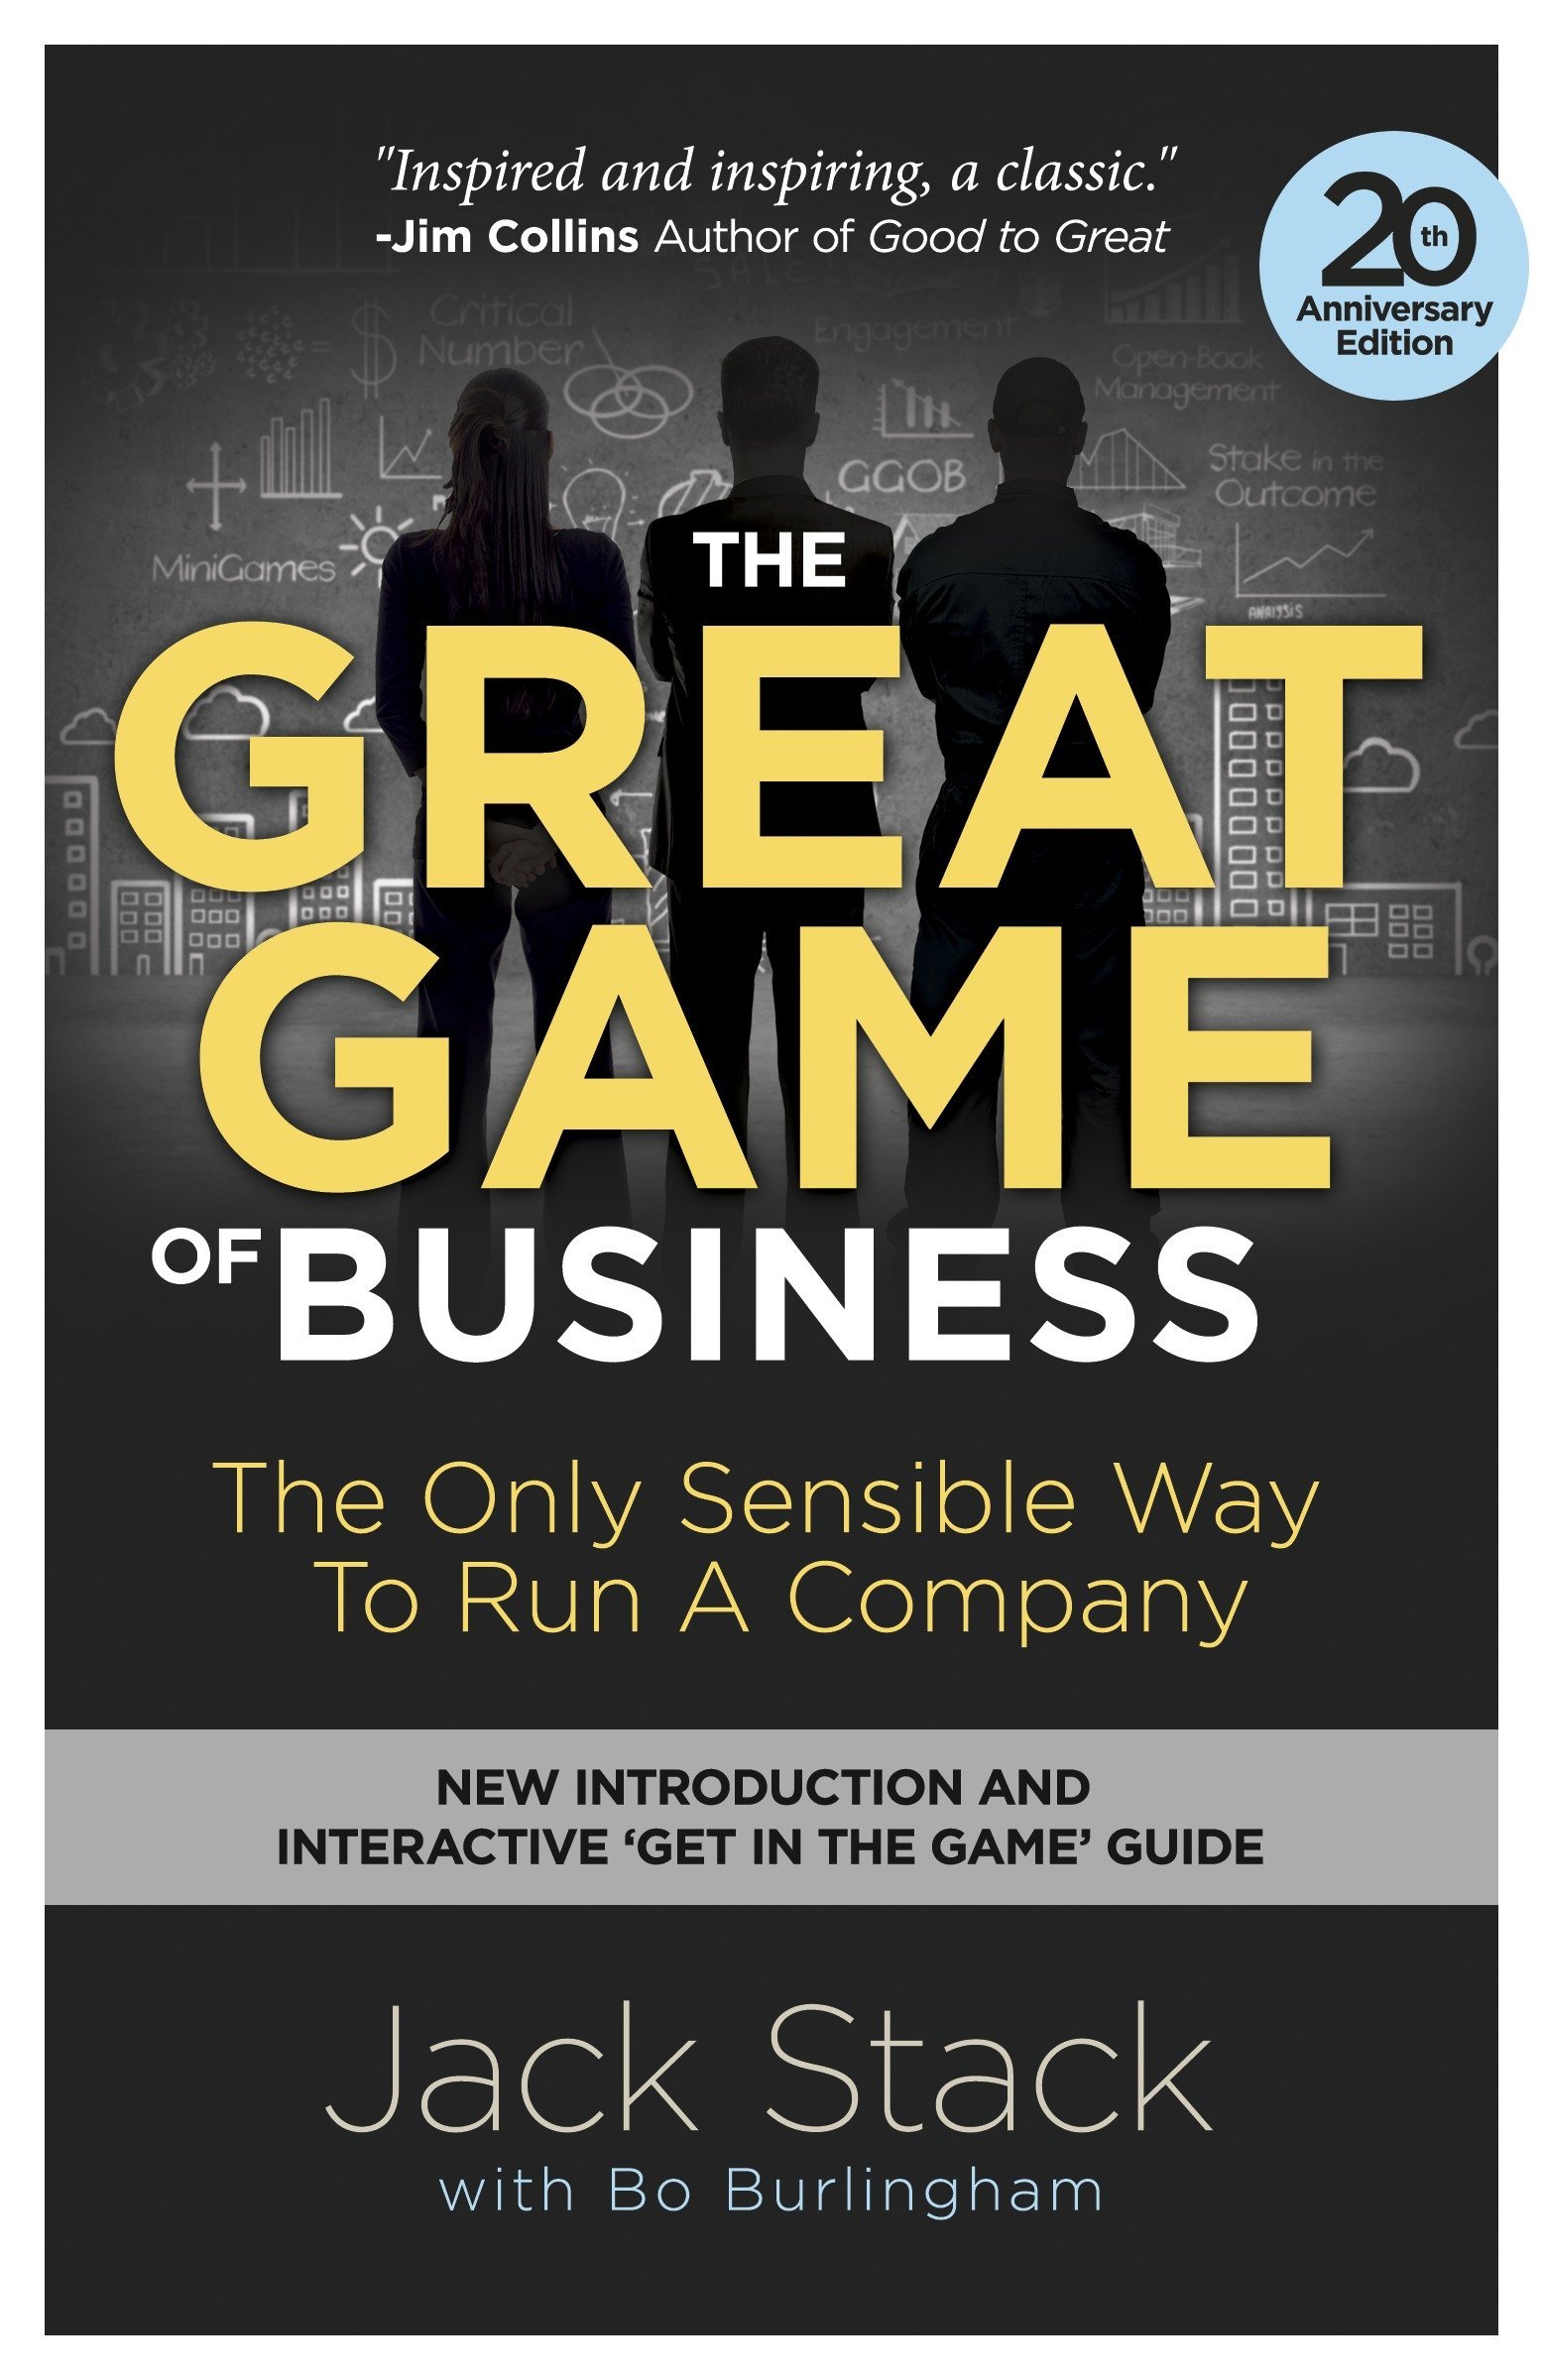 The Great Game of Busines Image